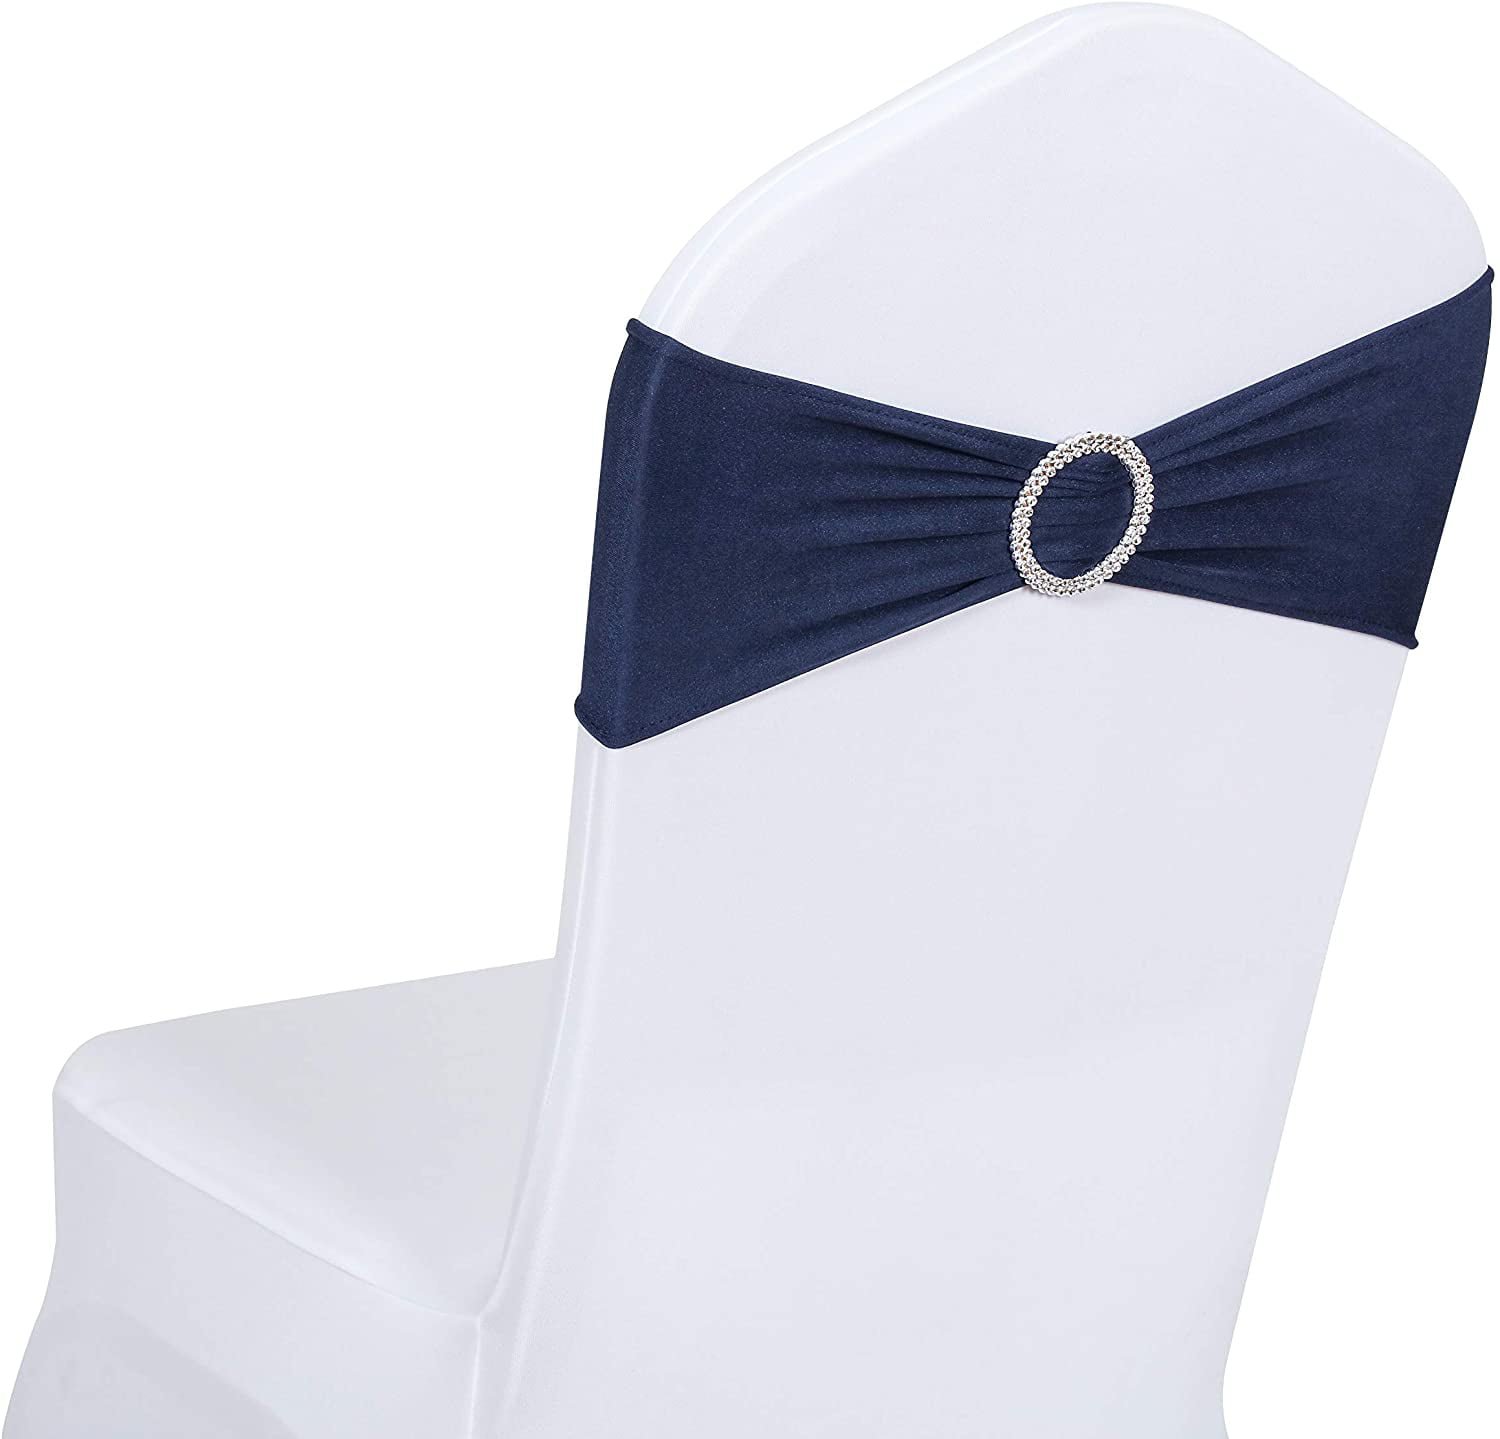 1 10 50 100 Spandex Lycra Sashes Chair Cover Bow Sash BOW BOWS Wedding Party Hot 